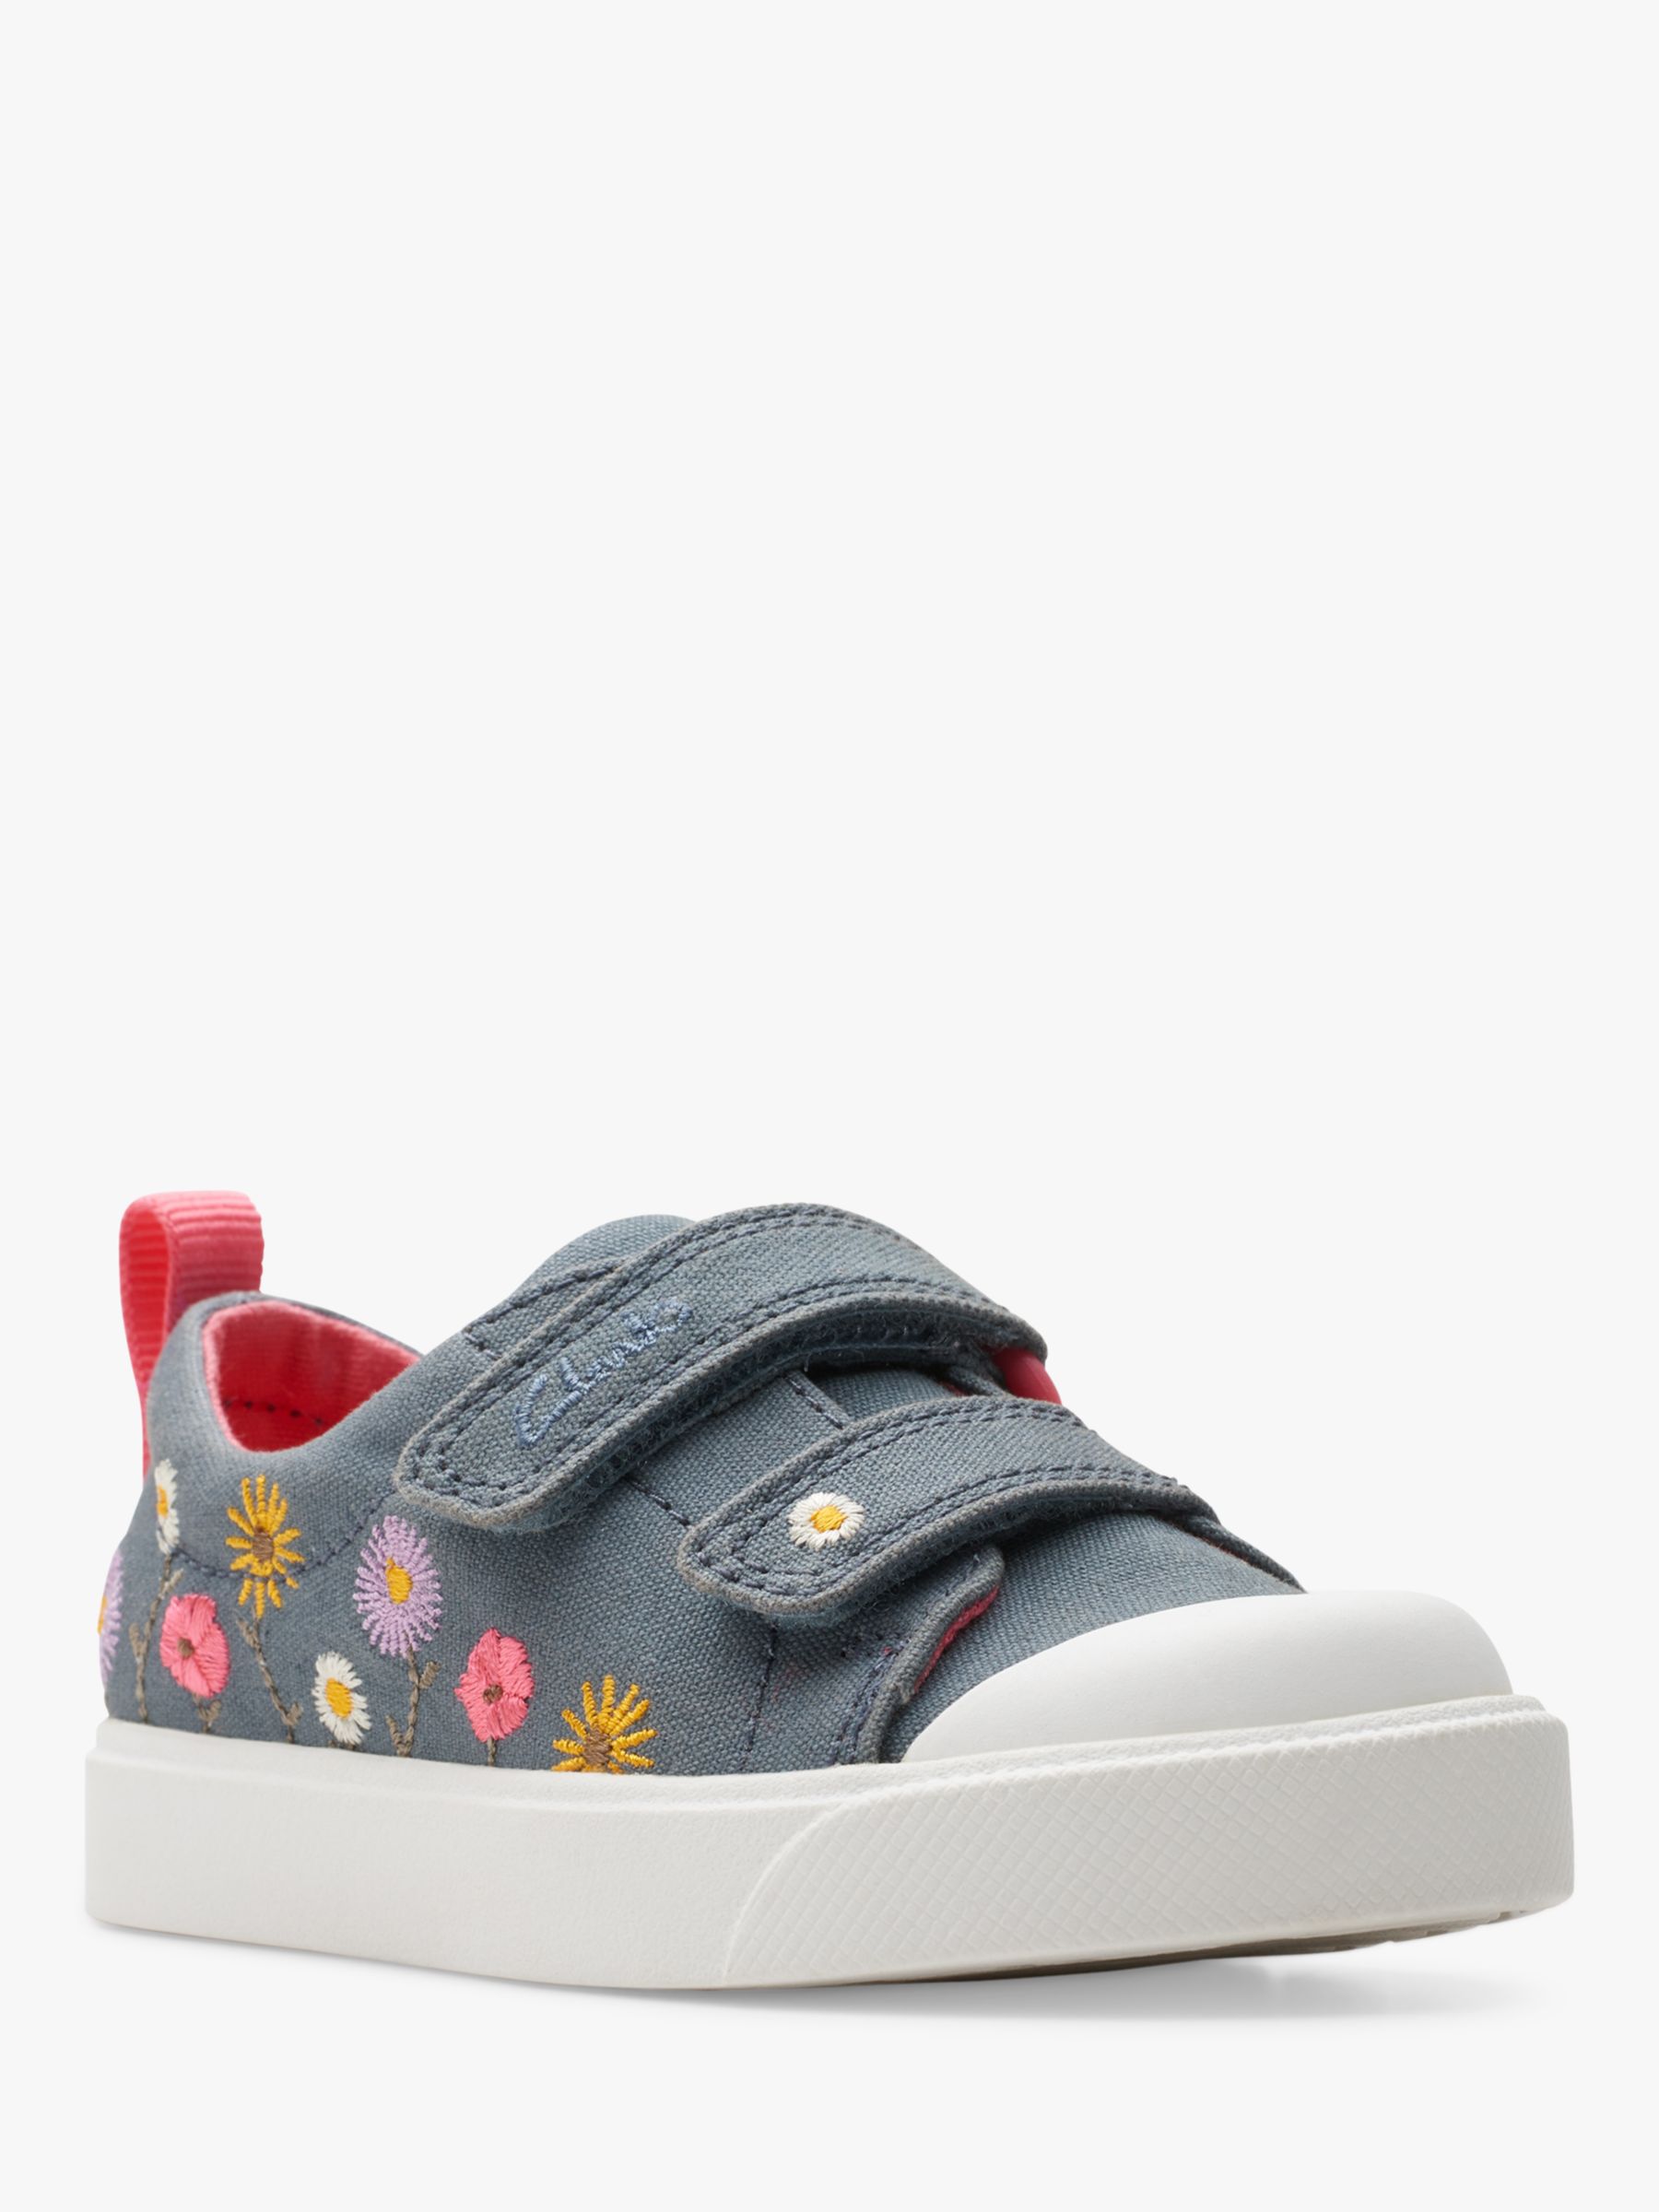 Clarks Kids' City Bright Canvas Floral Embroidered Trainers, Blue, 5.5F Jnr